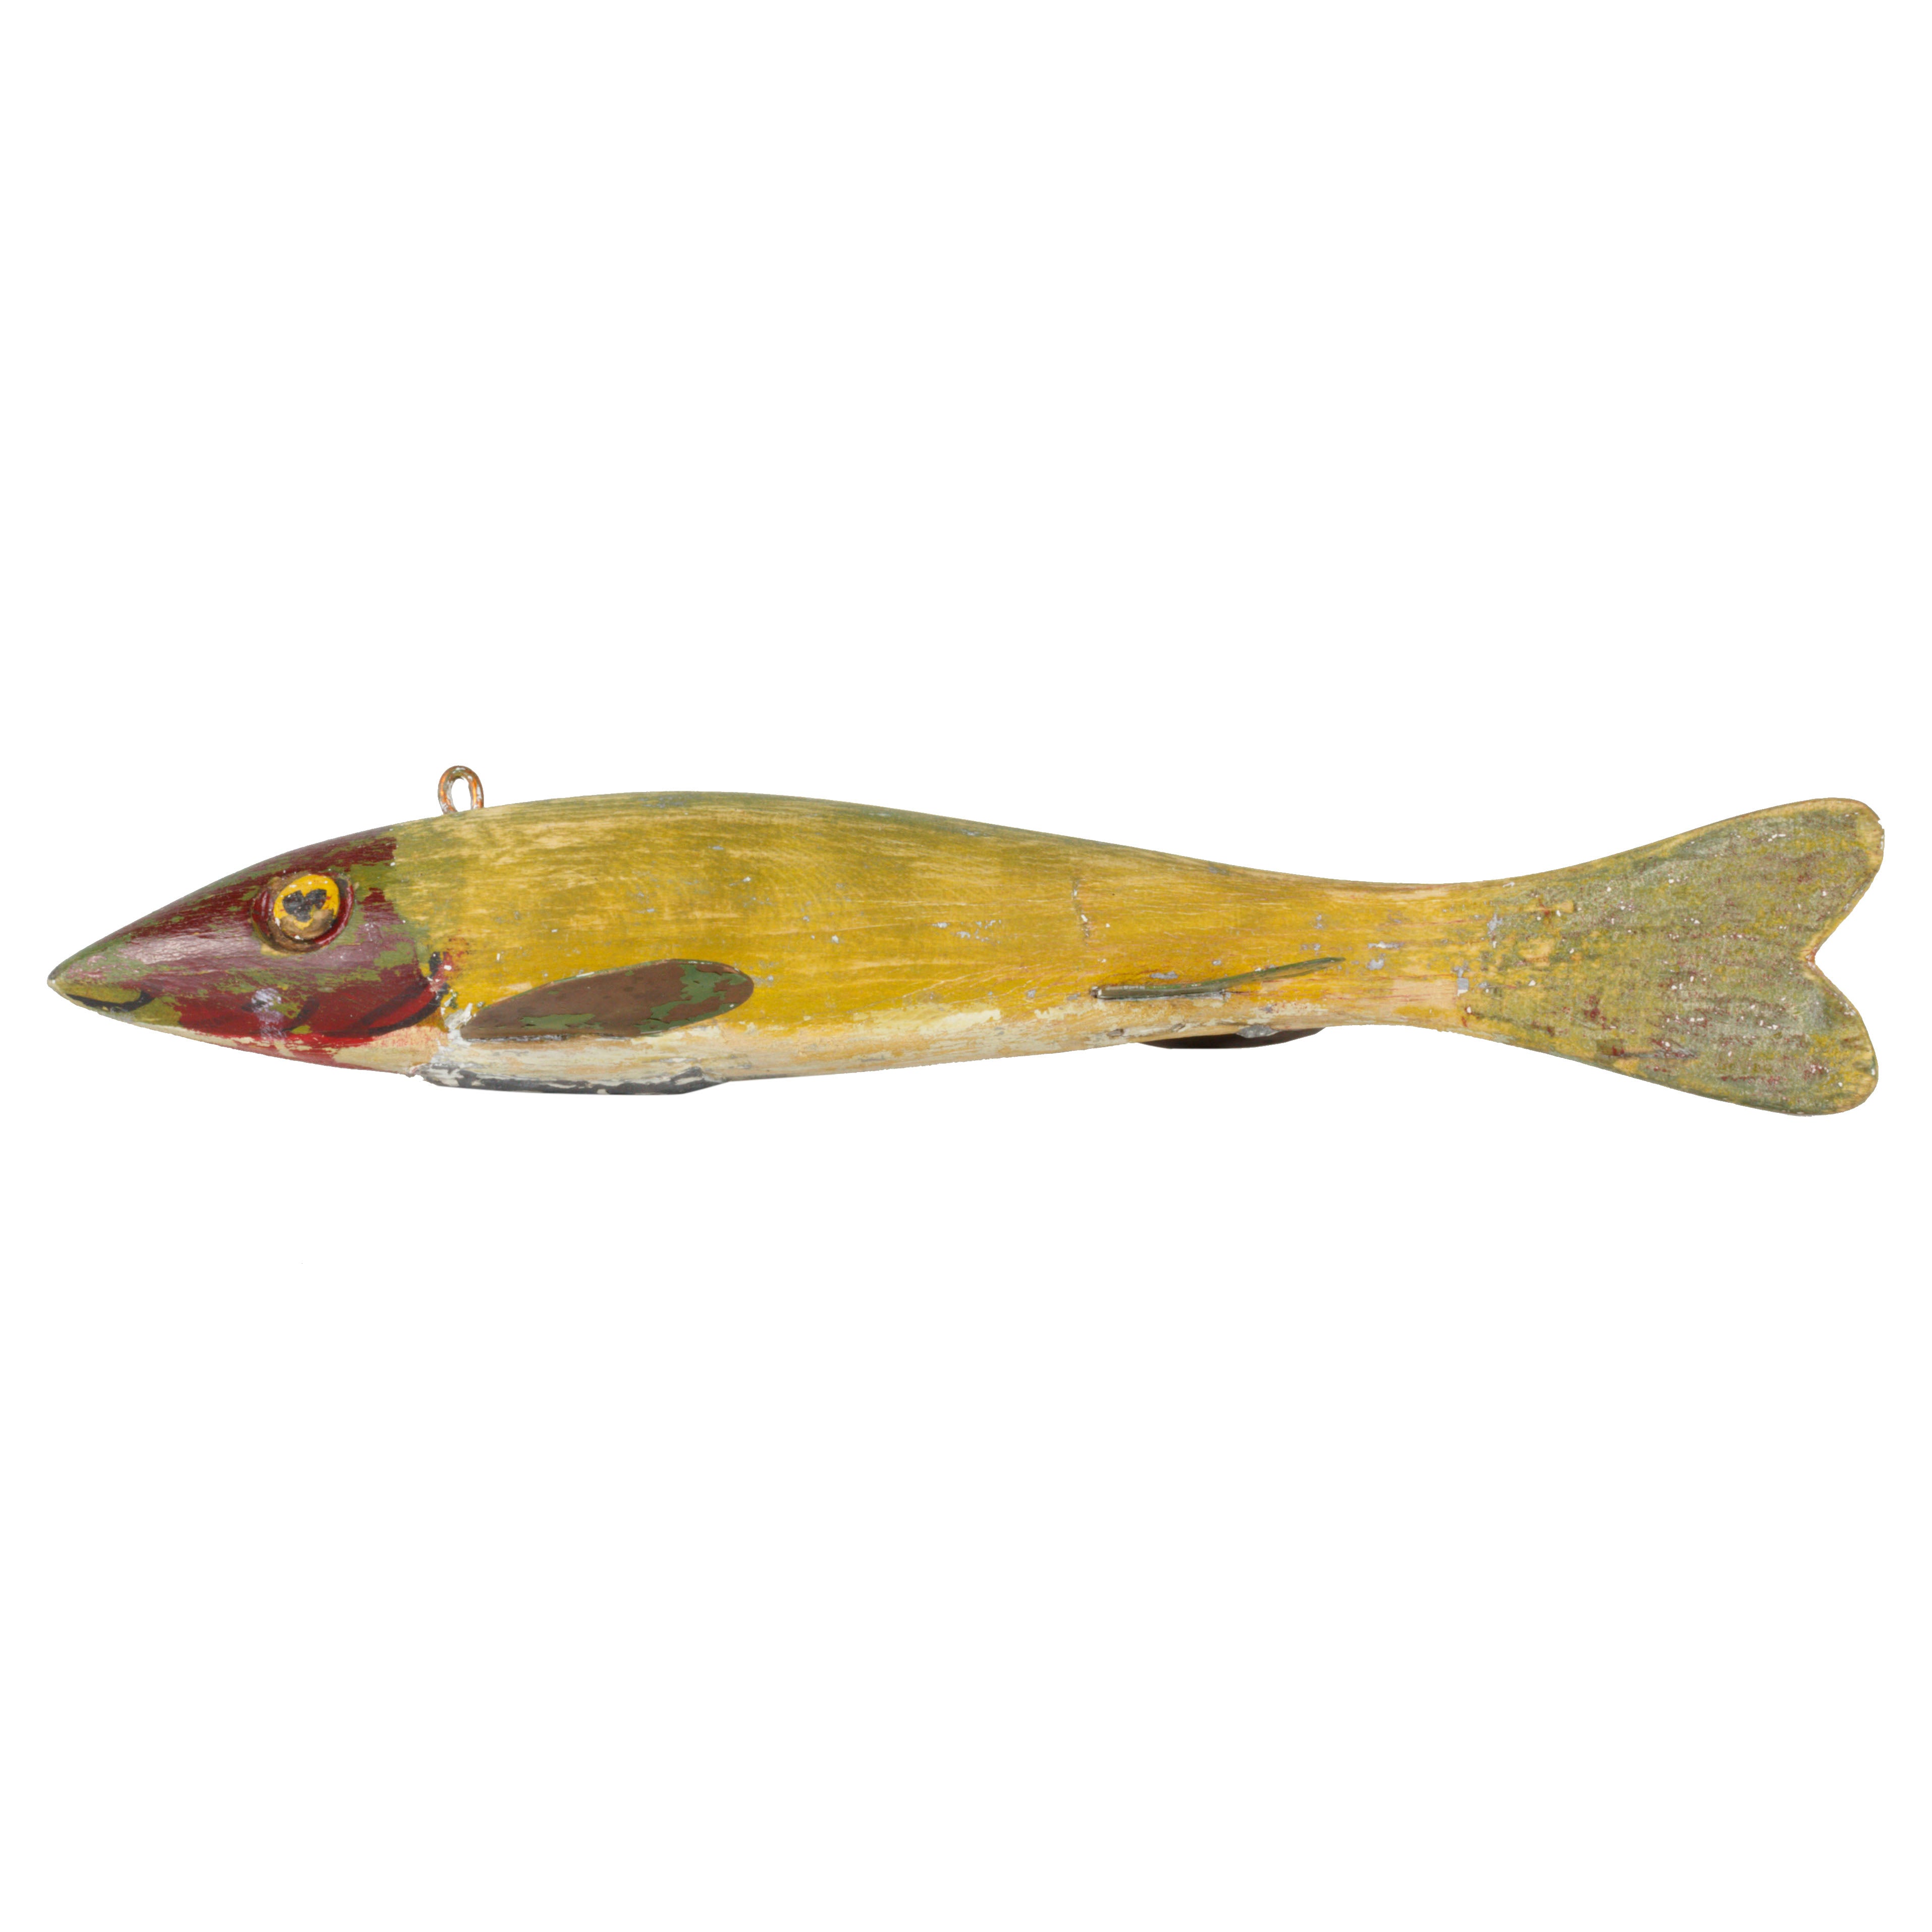 Spearfish Decoy with Copper Fins, Sporting Goods, Fishing, Decoy